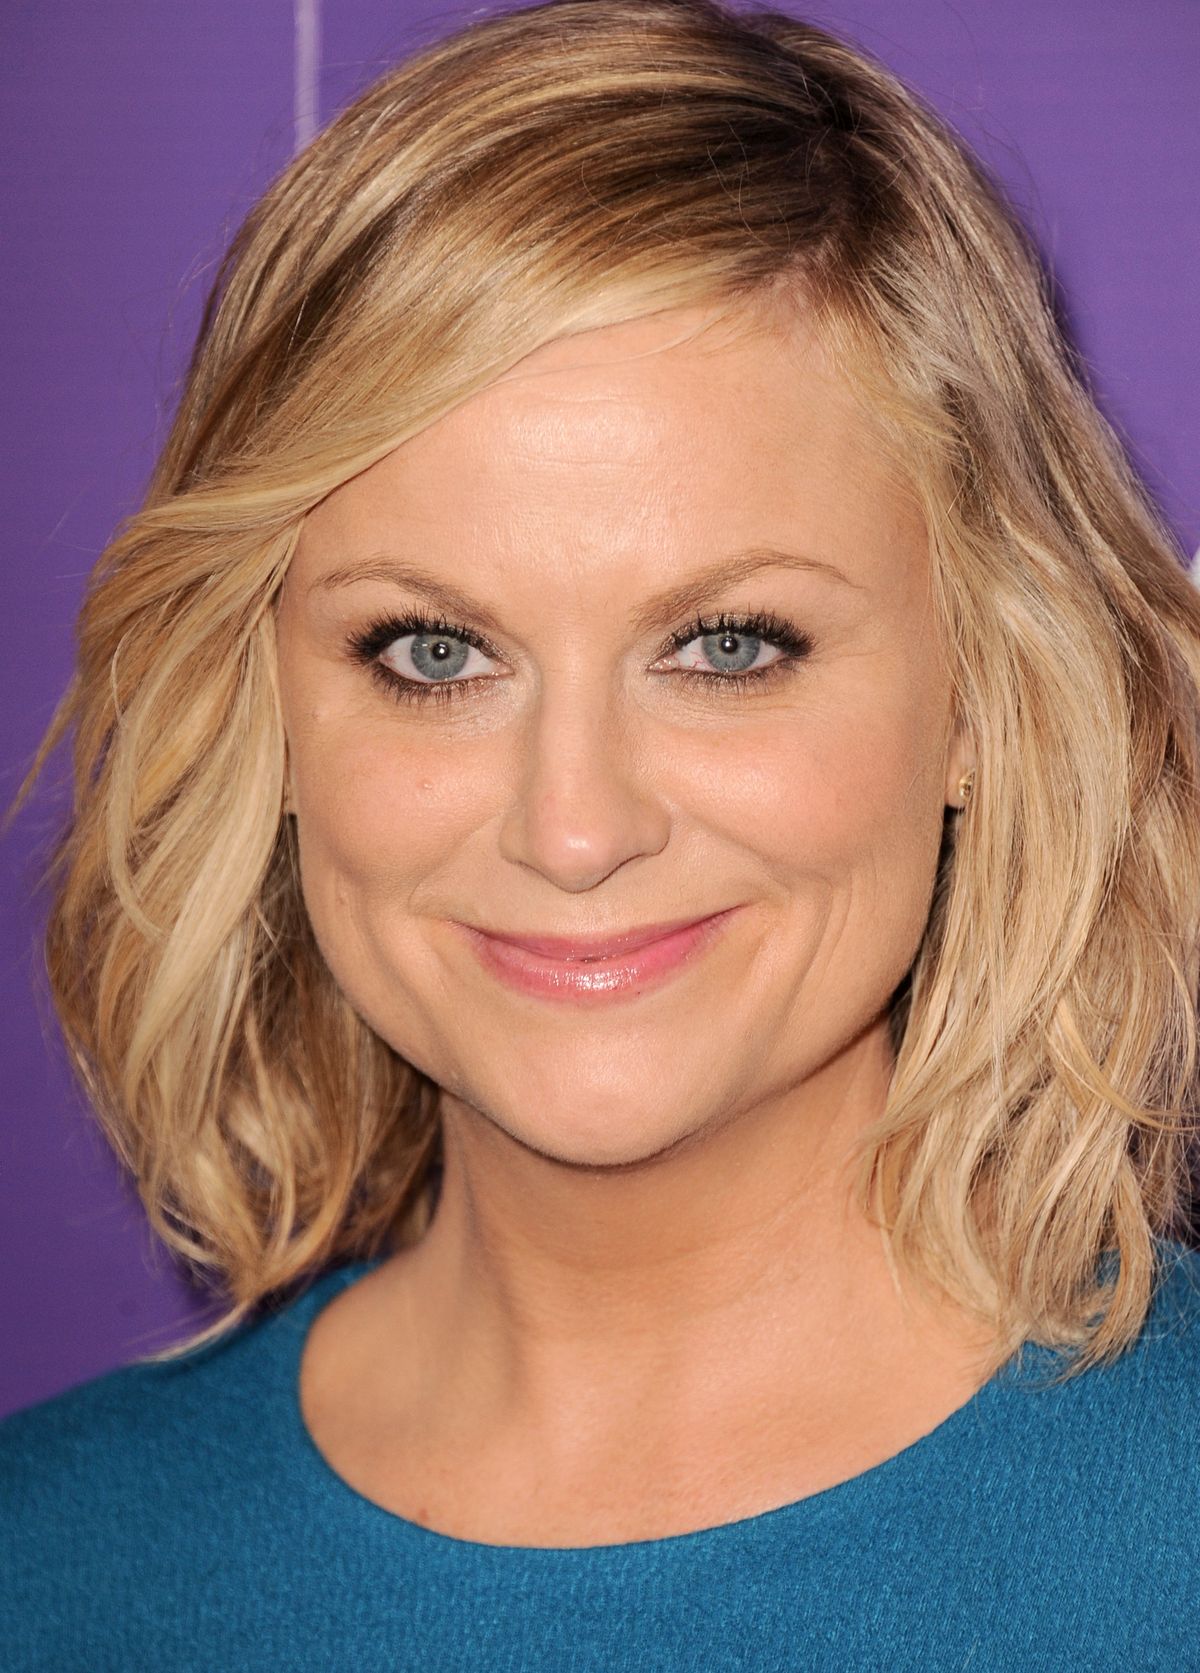 Amy Poehler among actresses honored for philanthropy | The Spokesman-Review